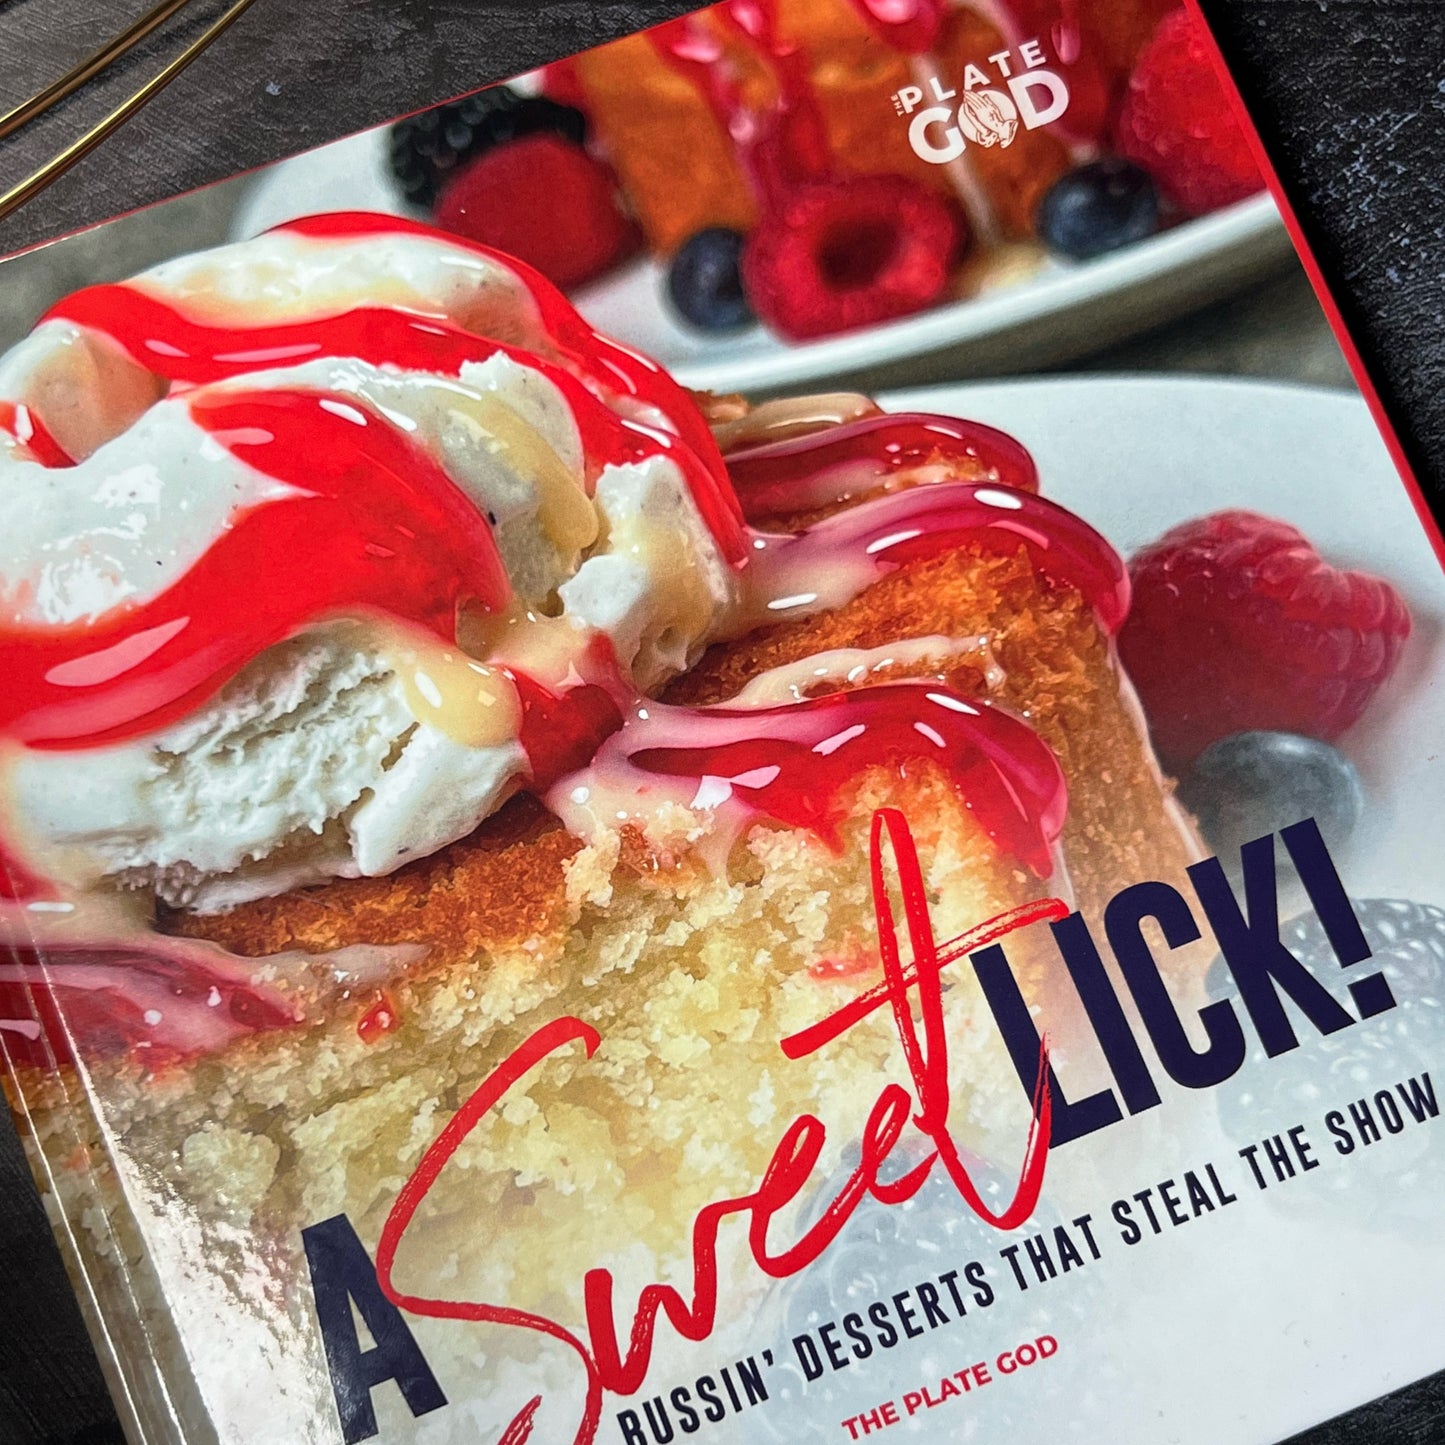 A Sweet Lick: Bussin' Desserts That Steal the Show (Hardcover)